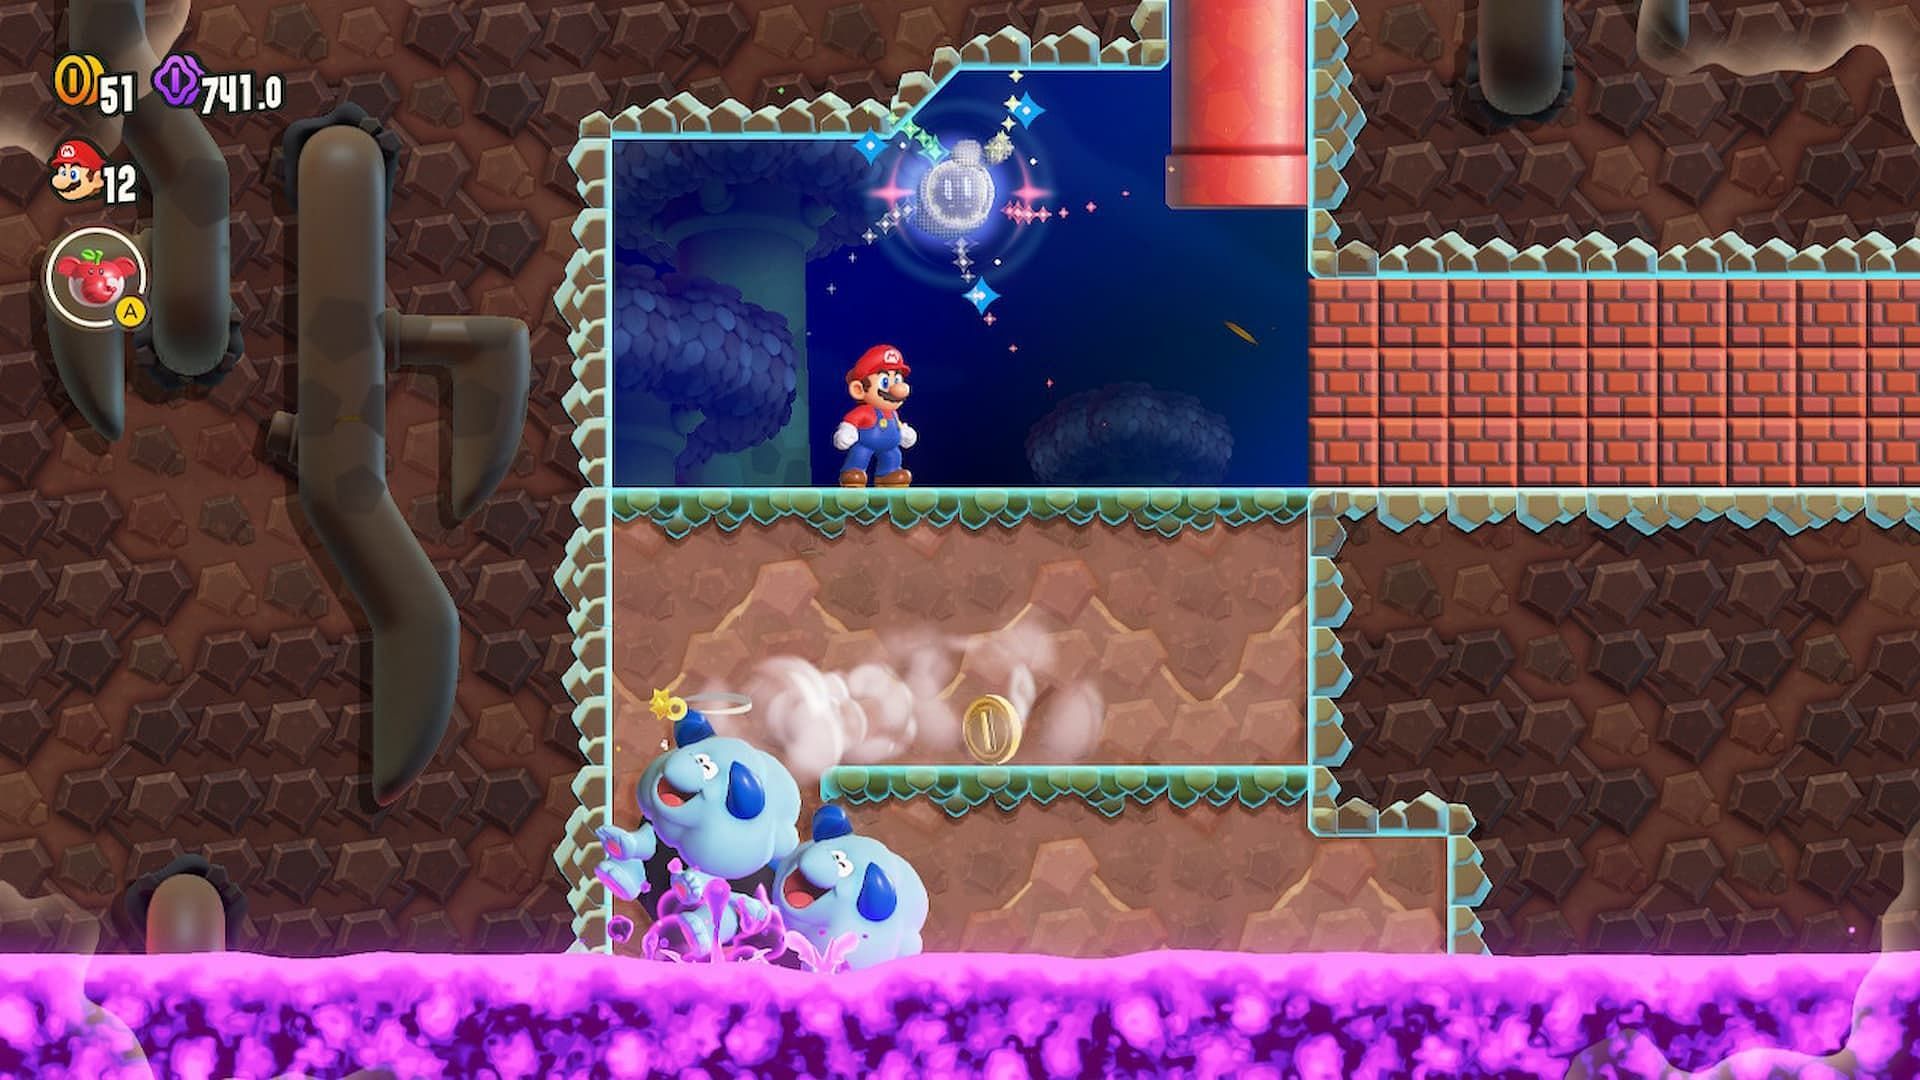 Find and destroy the bricks to the right of the red pipe (Image via Nintendo)